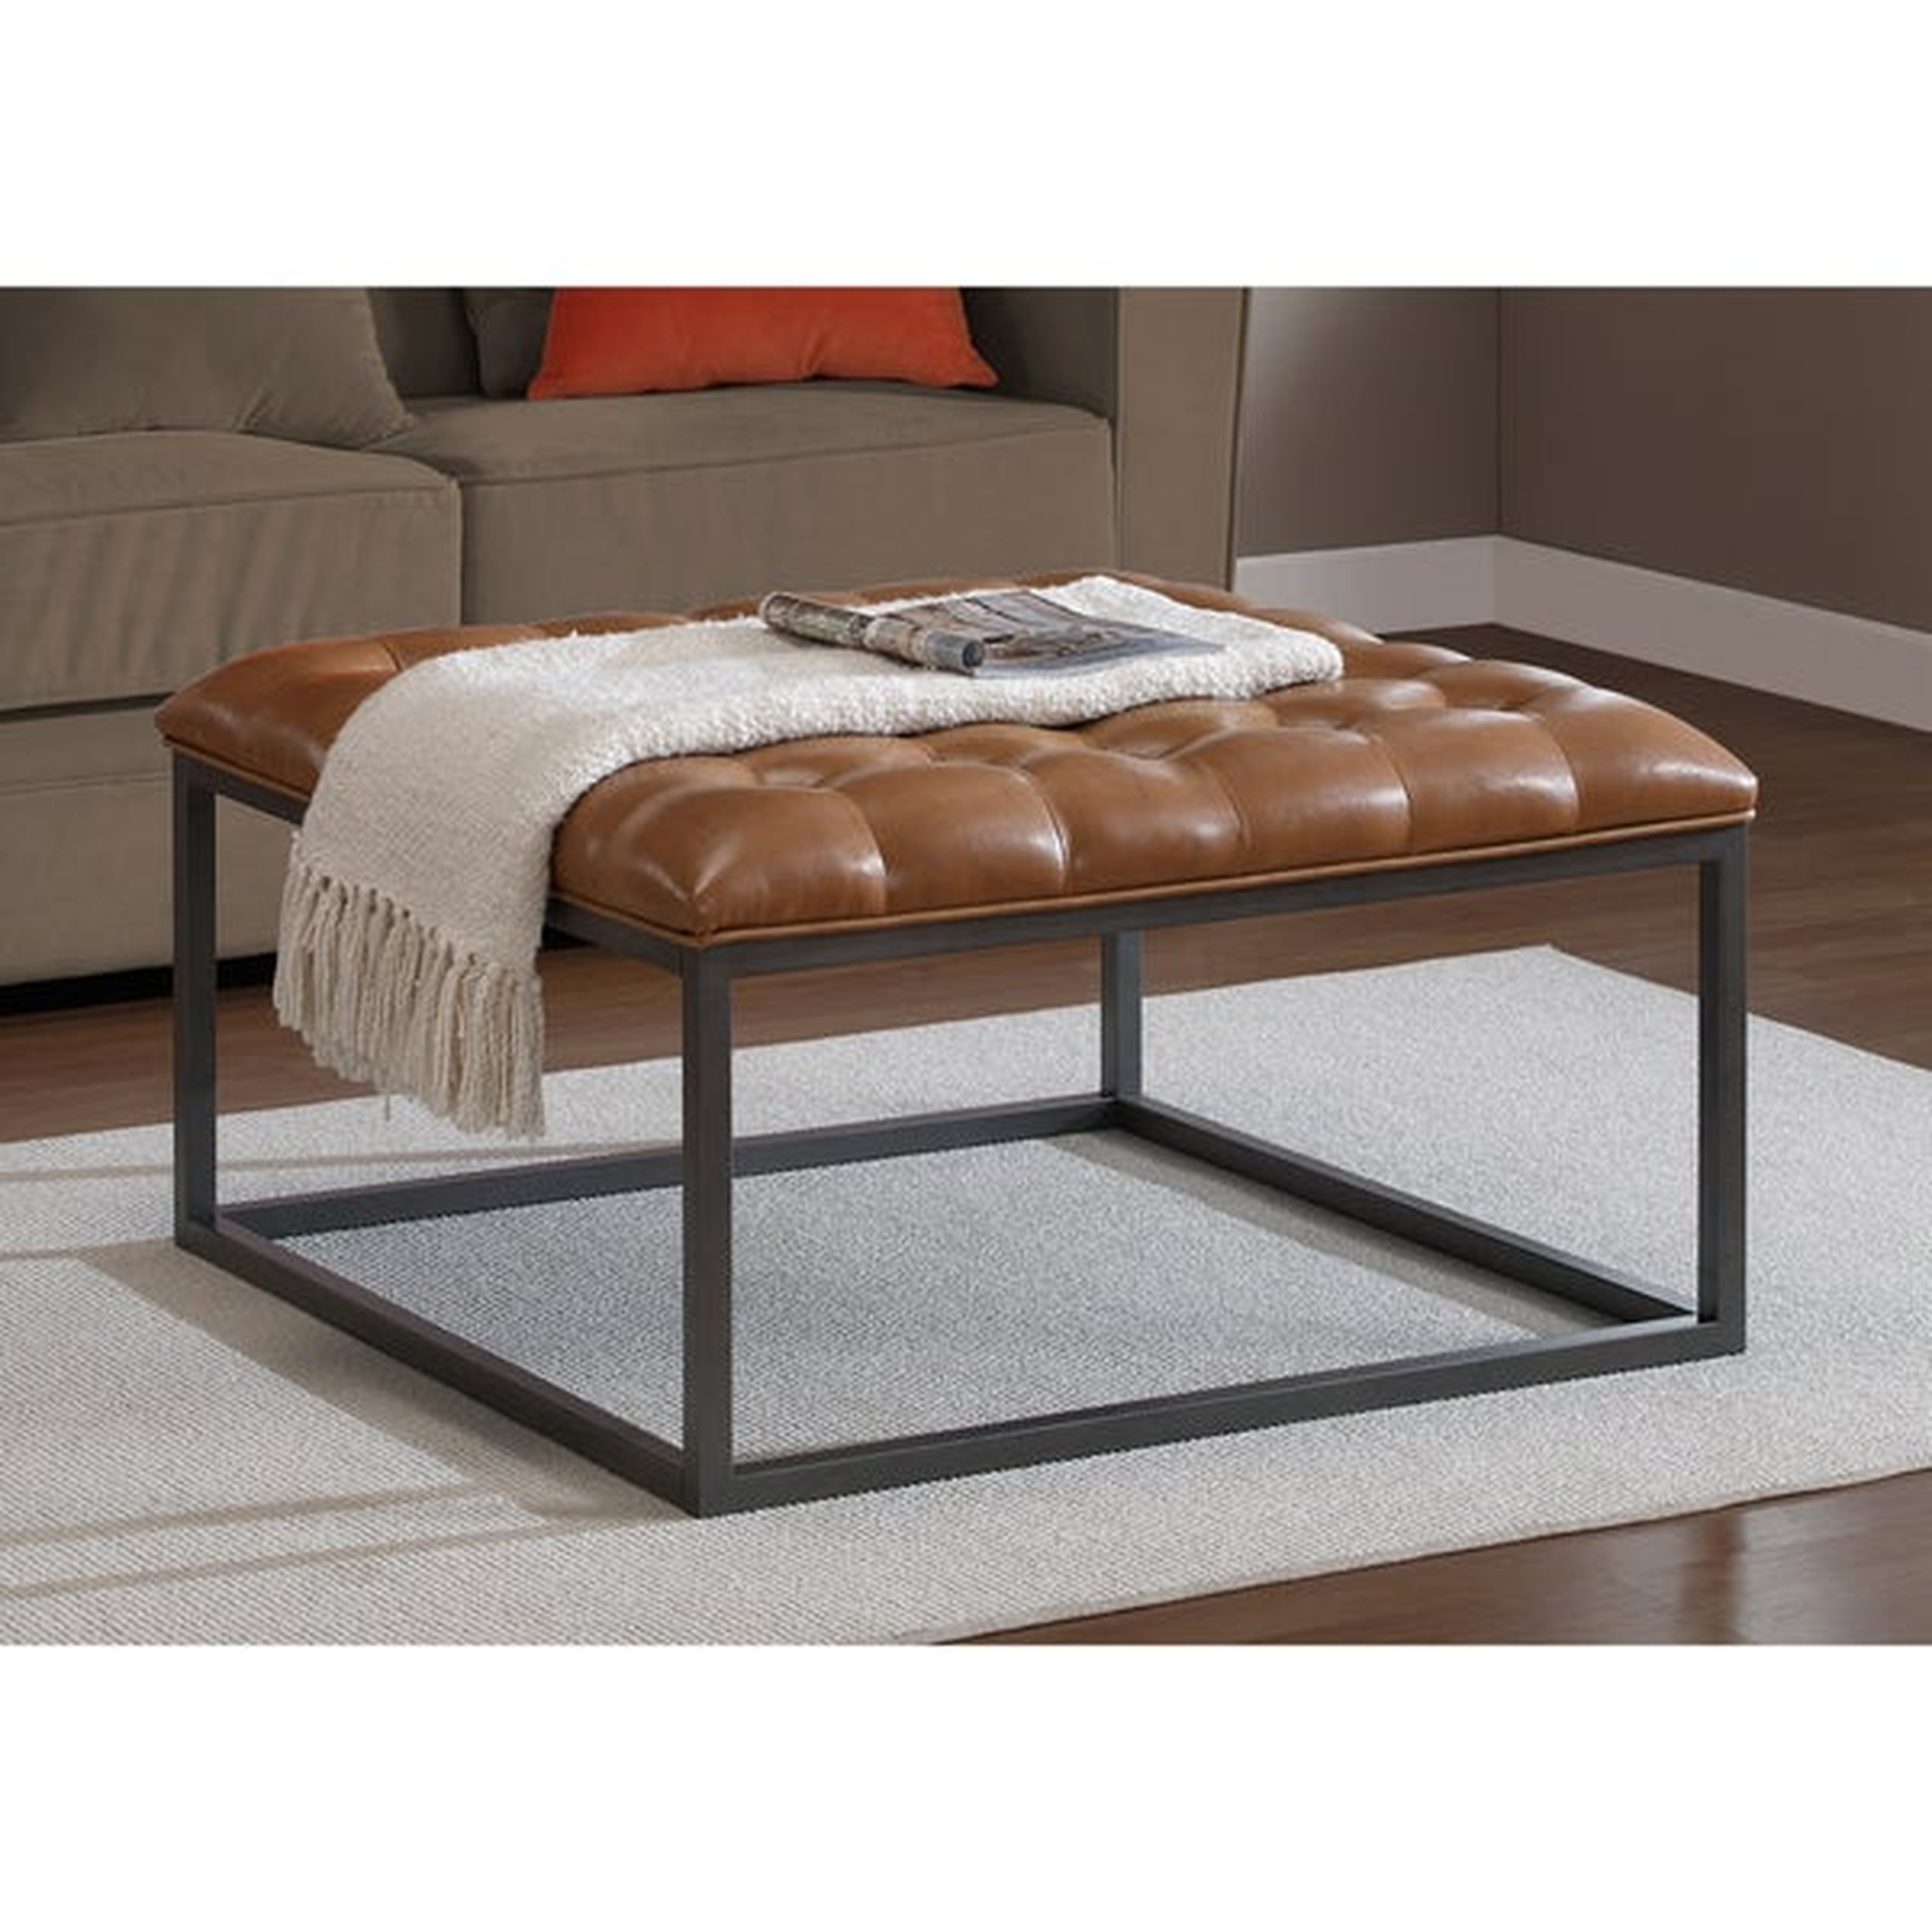 Healy Saddle Brown Leather Tufted Ottoman - Overstock